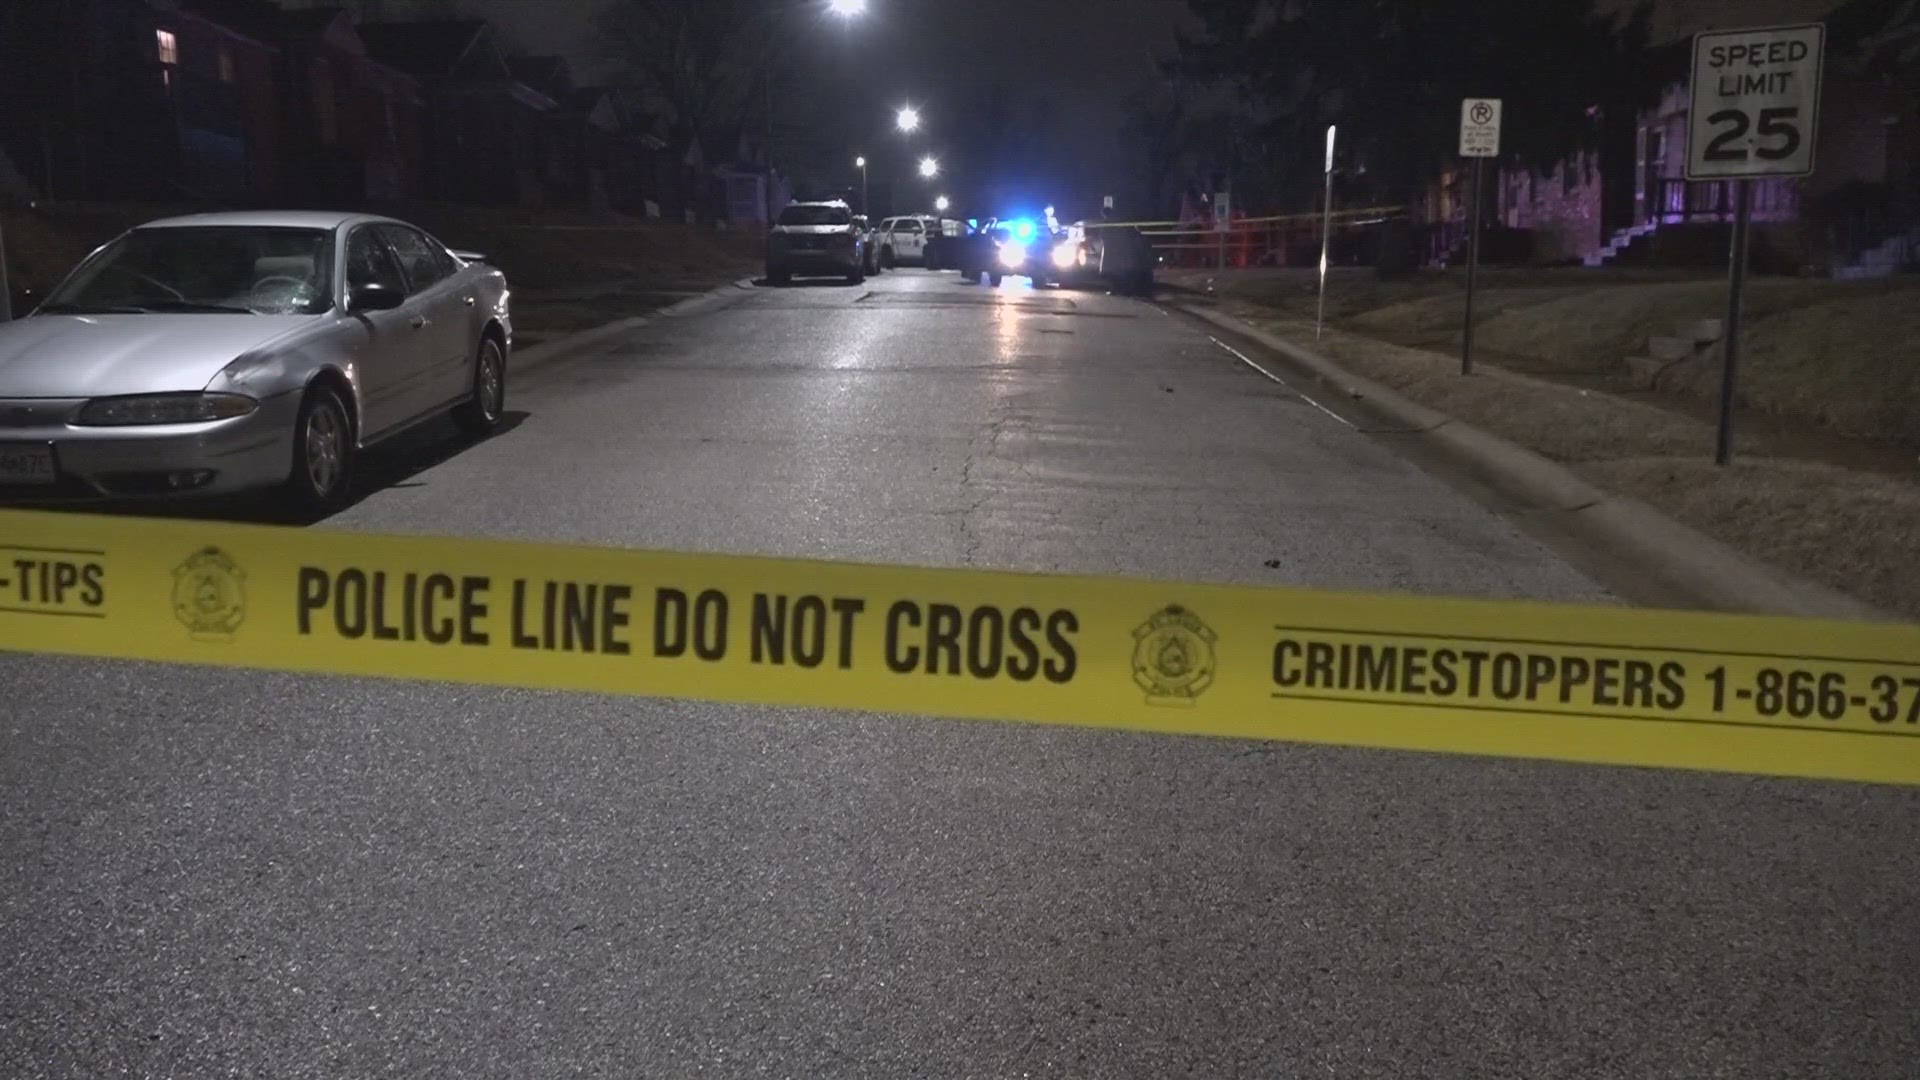 Six people were killed this weekend in shootings across St. Louis, police said. It's unclear what led up to the shootings, and the investigations are ongoing.